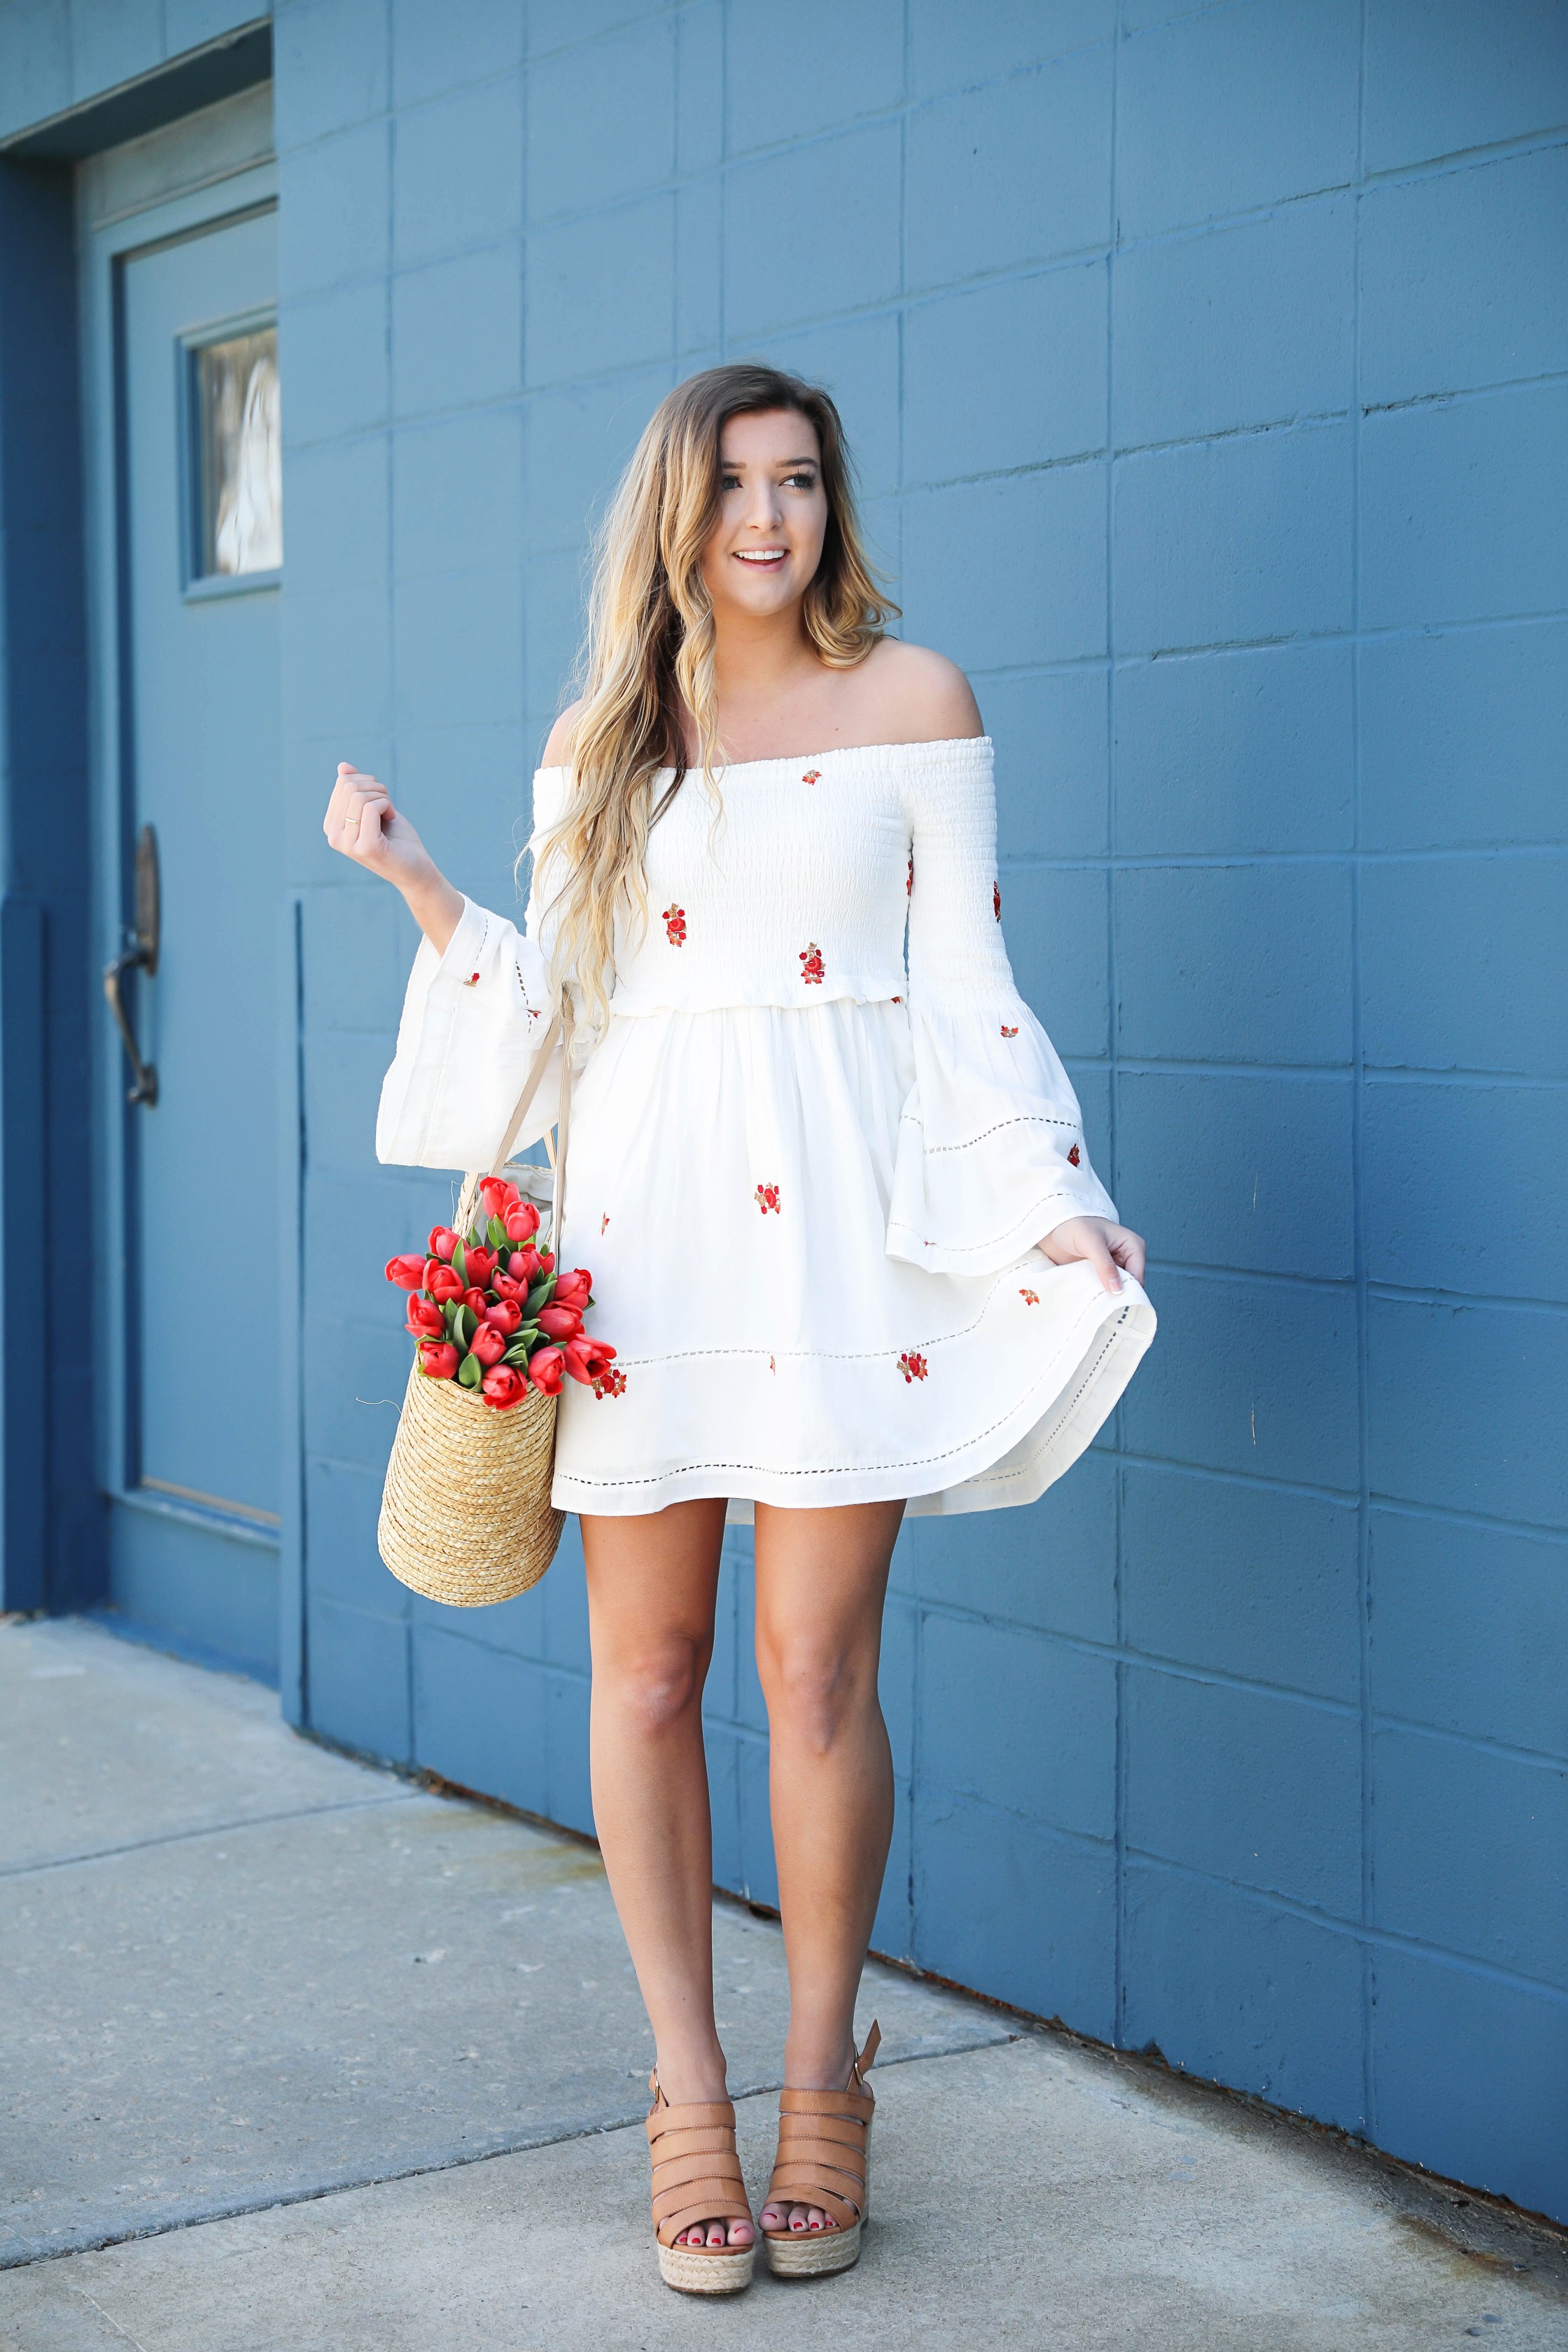 White off the shoulder dress with red embroidery by Free People! Love this look with red tulips in a straw bag and cute wedges! Perfect spring look on fashion blog daily dose of charm by lauren lindmark